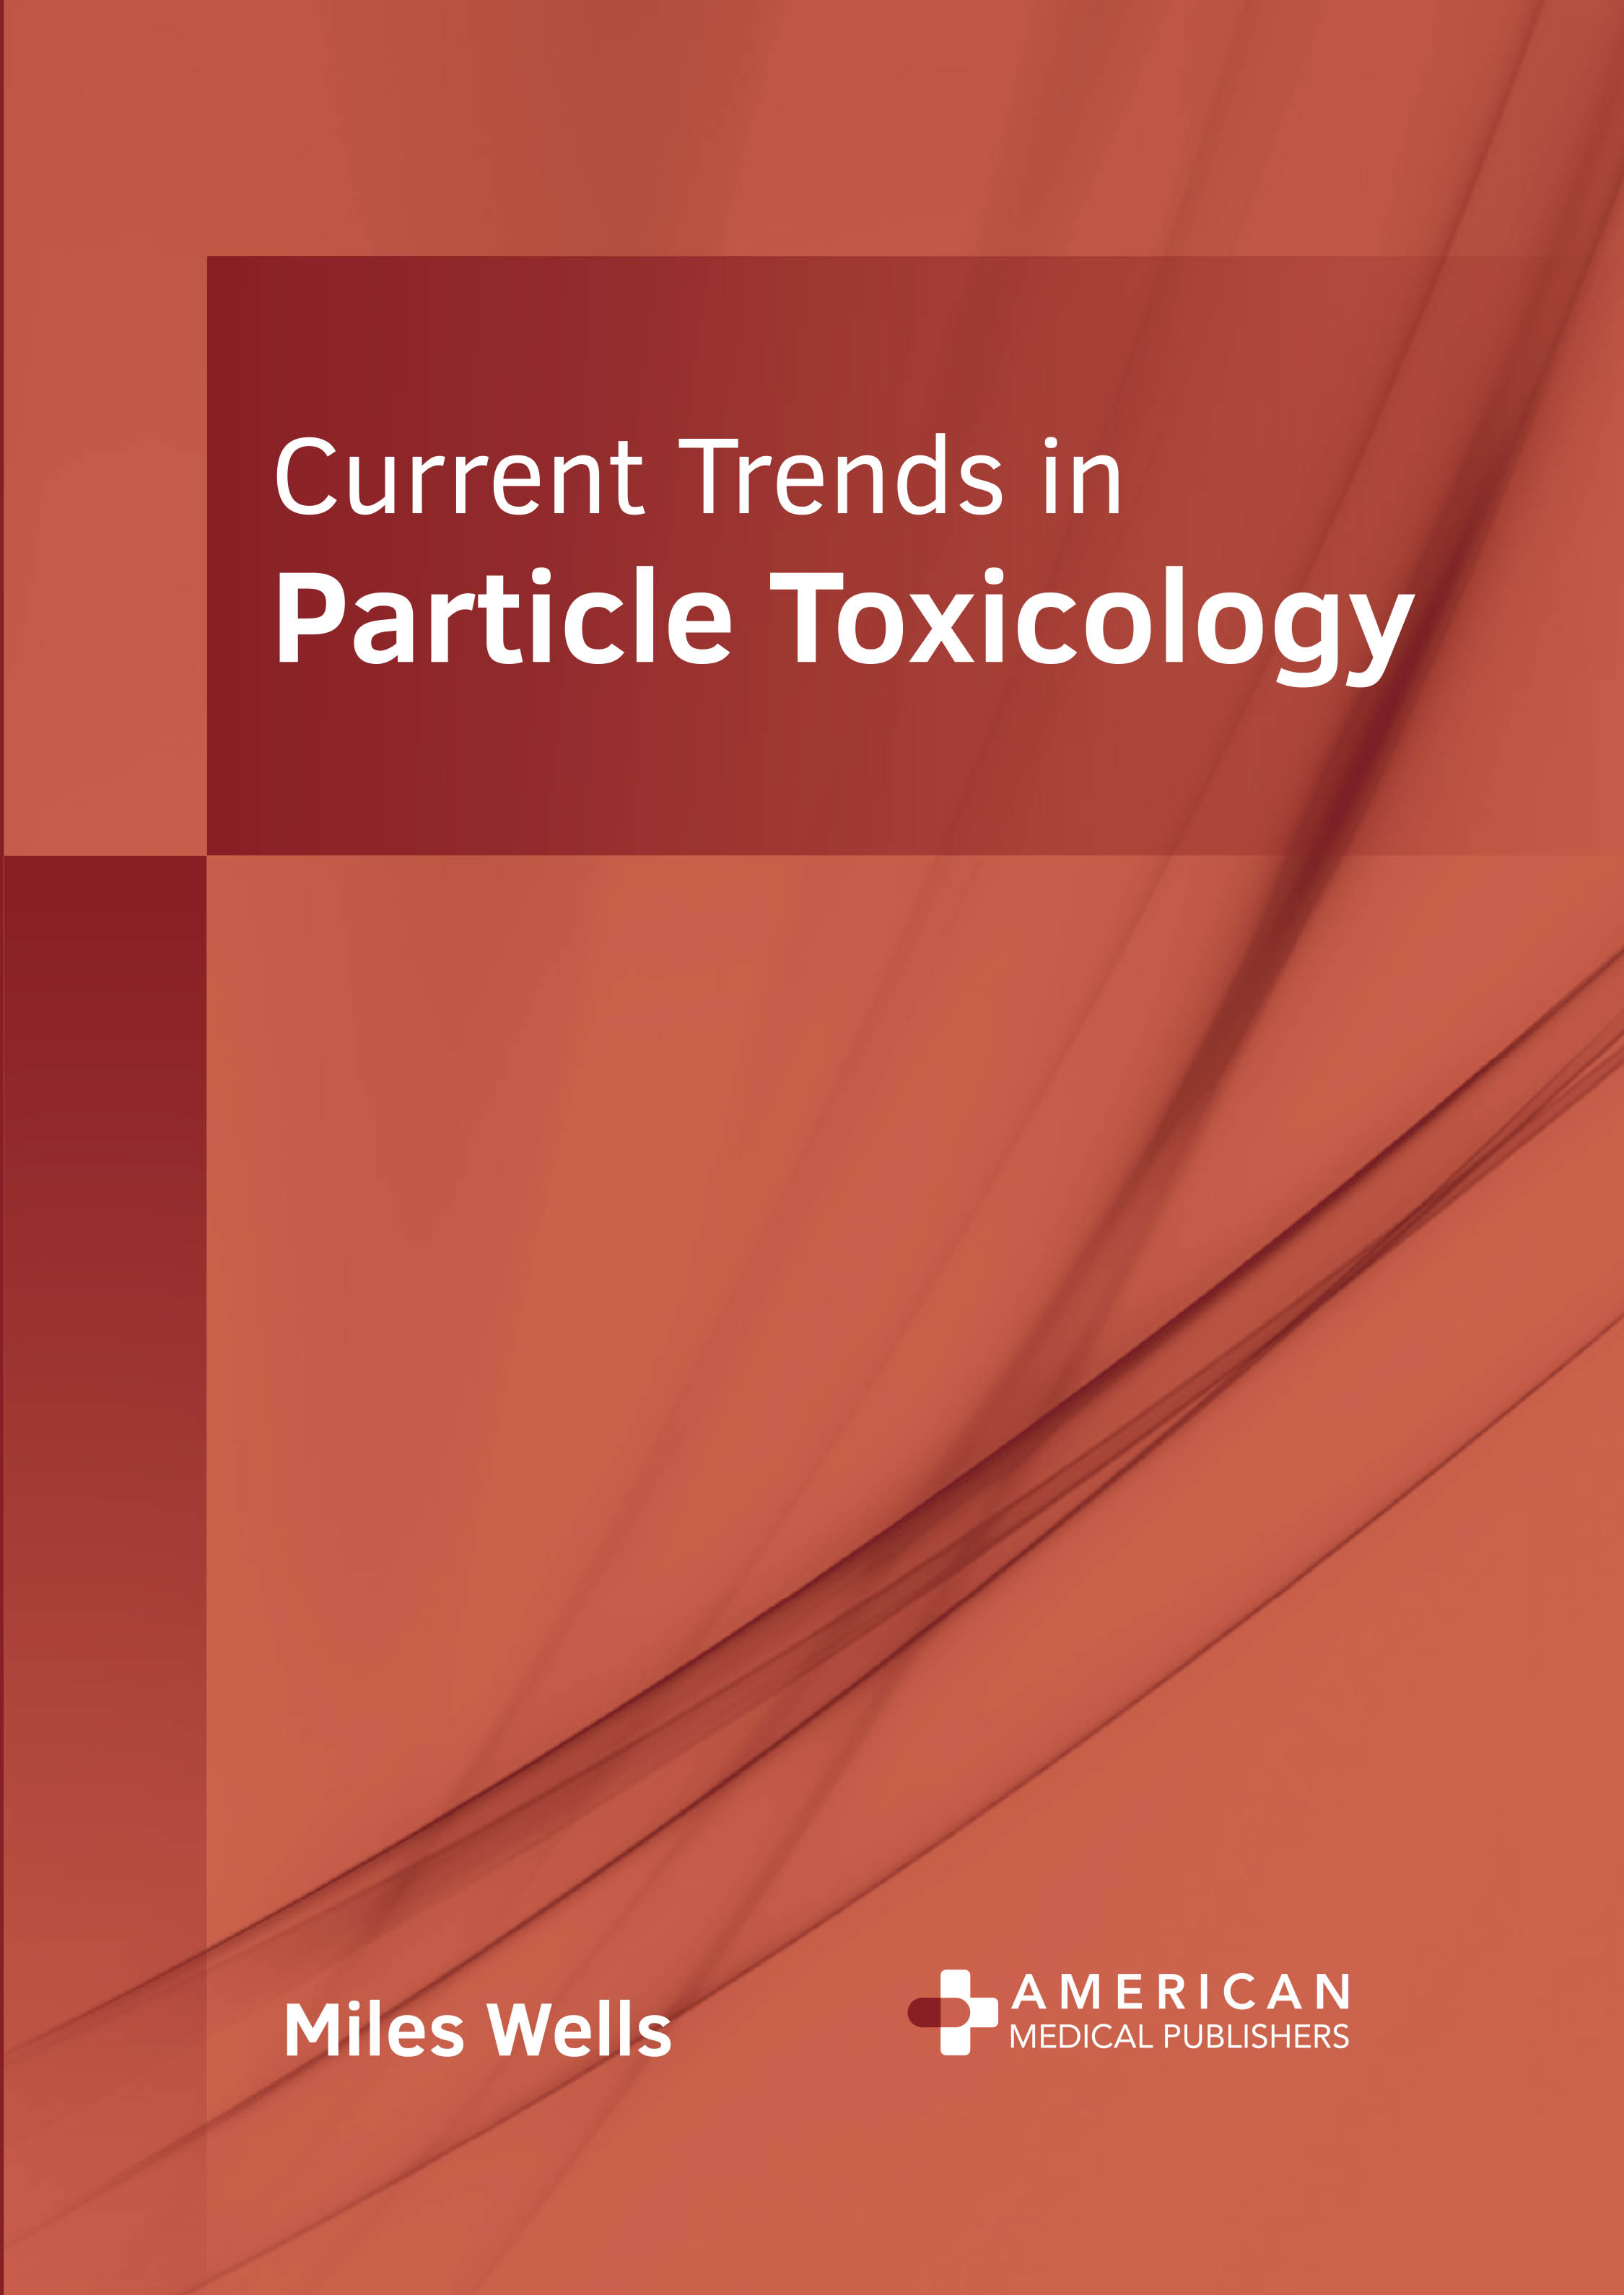 CURRENT TRENDS IN PARTICLE TOXICOLOGY